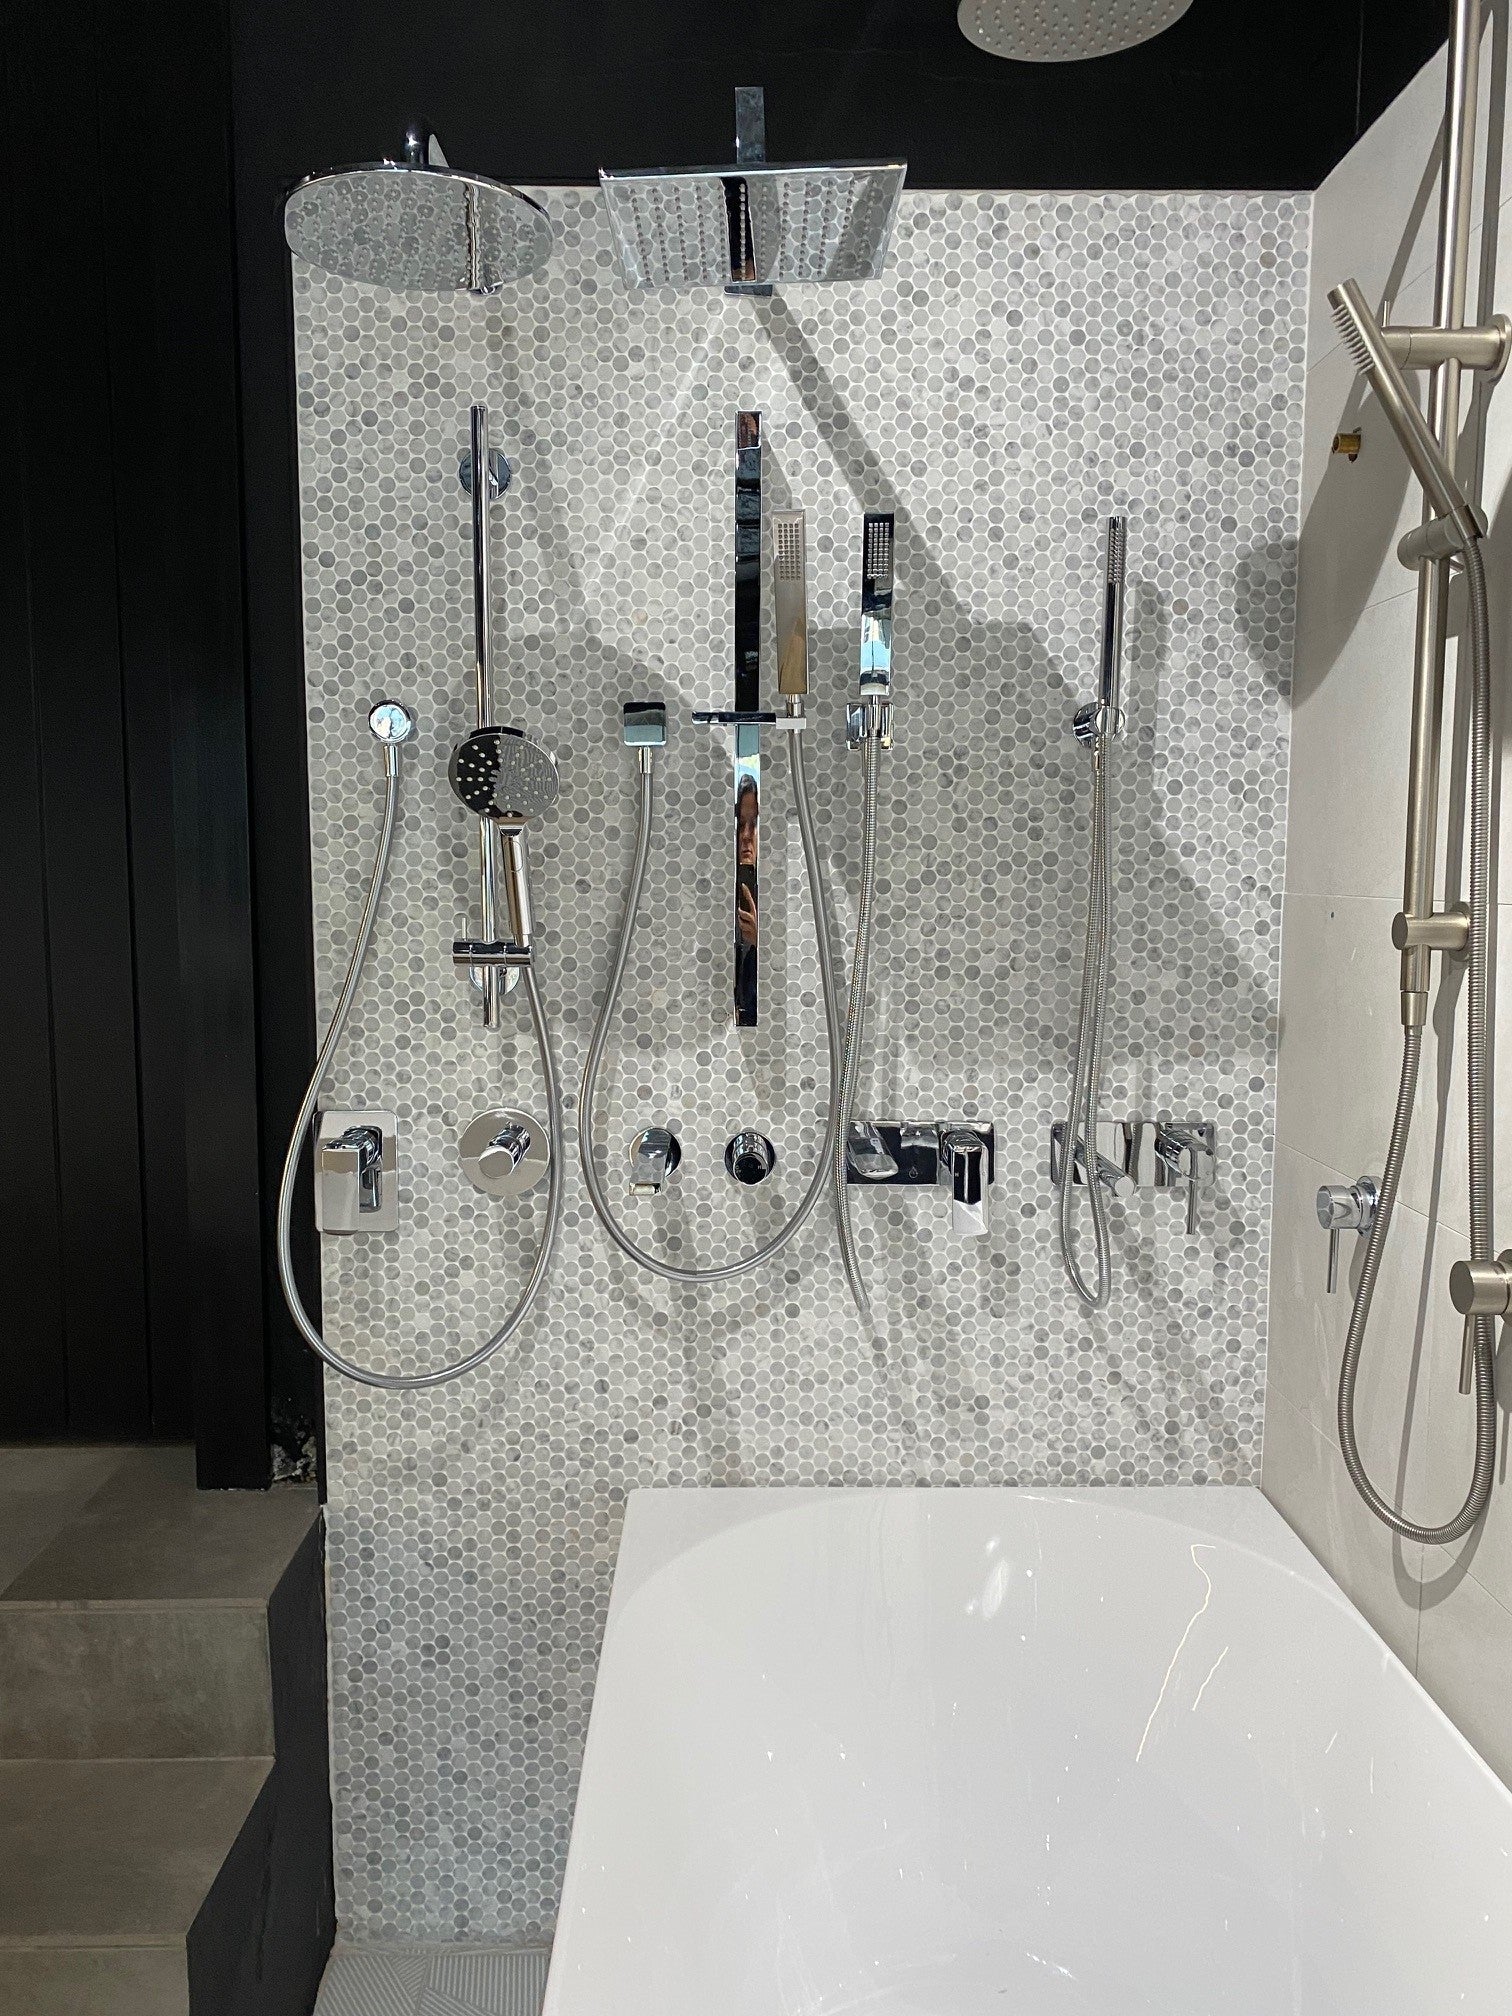 Ex-Display Daintree Shower Elbow Square in Chrome